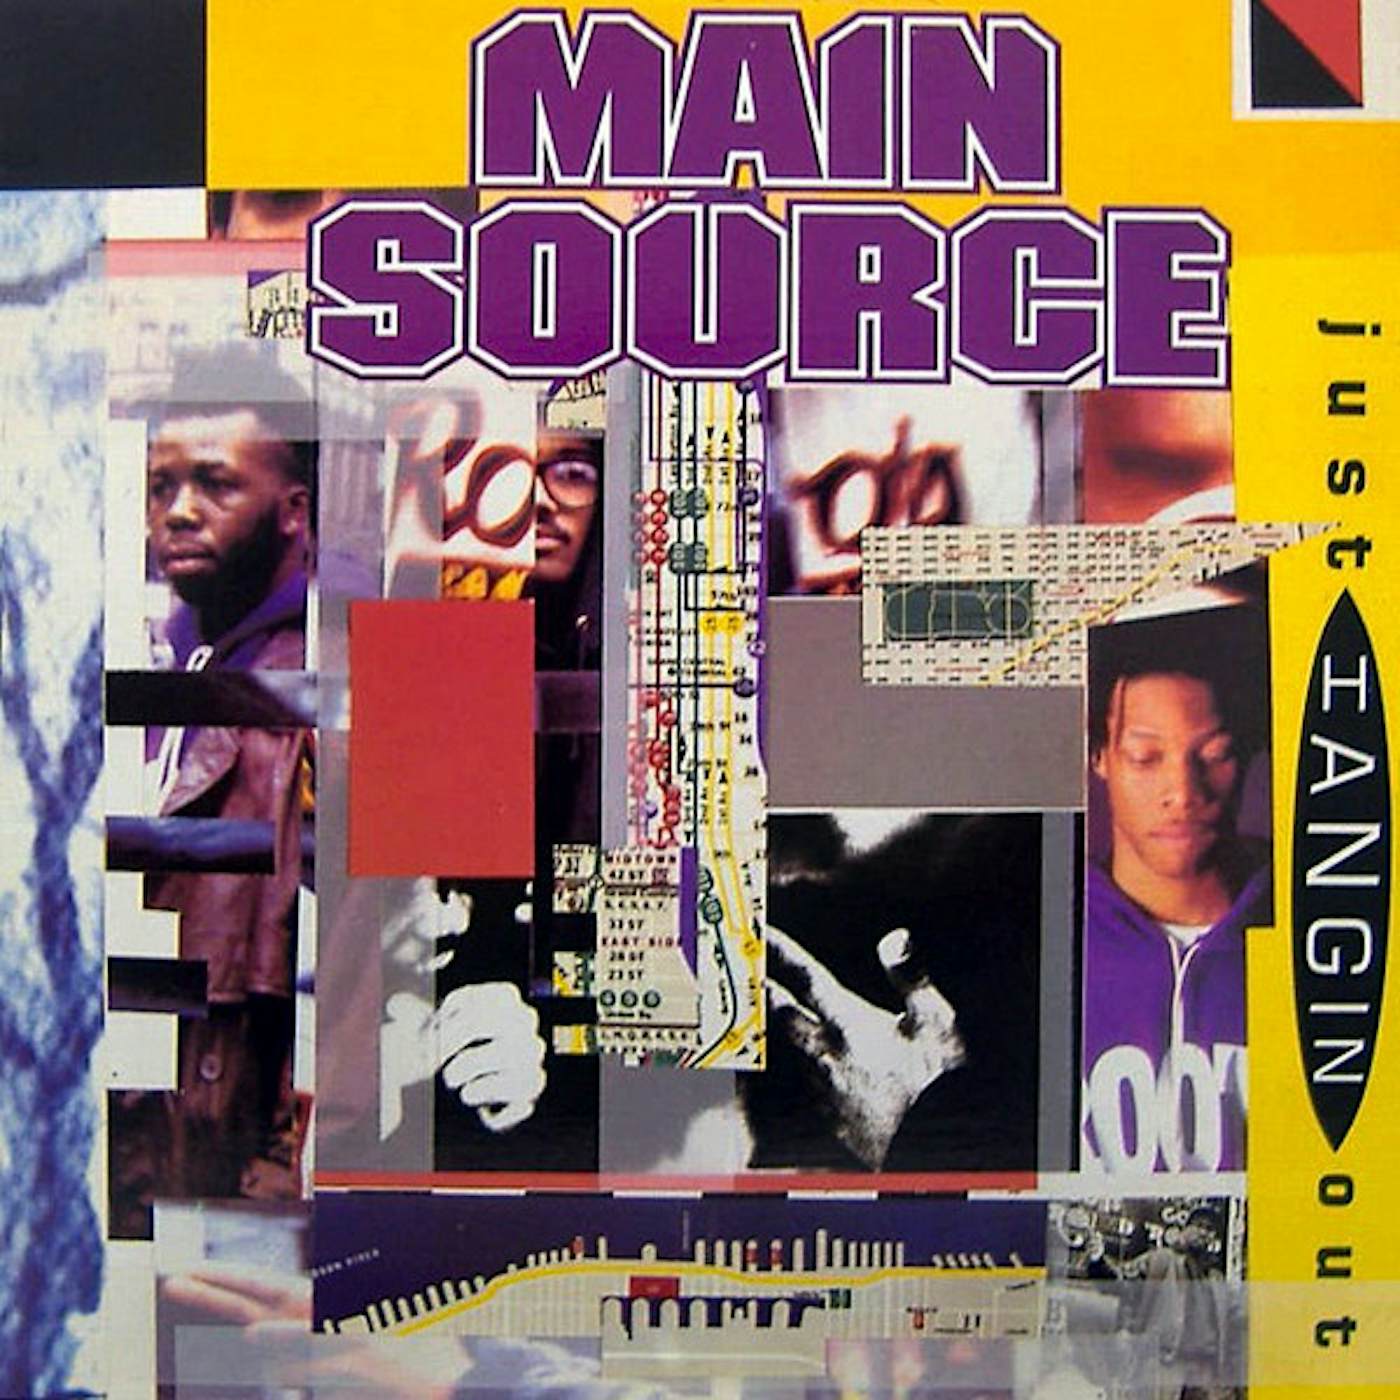 Main Source JUST HANGIN OUT / LIVE AT THE BBQ Vinyl Record